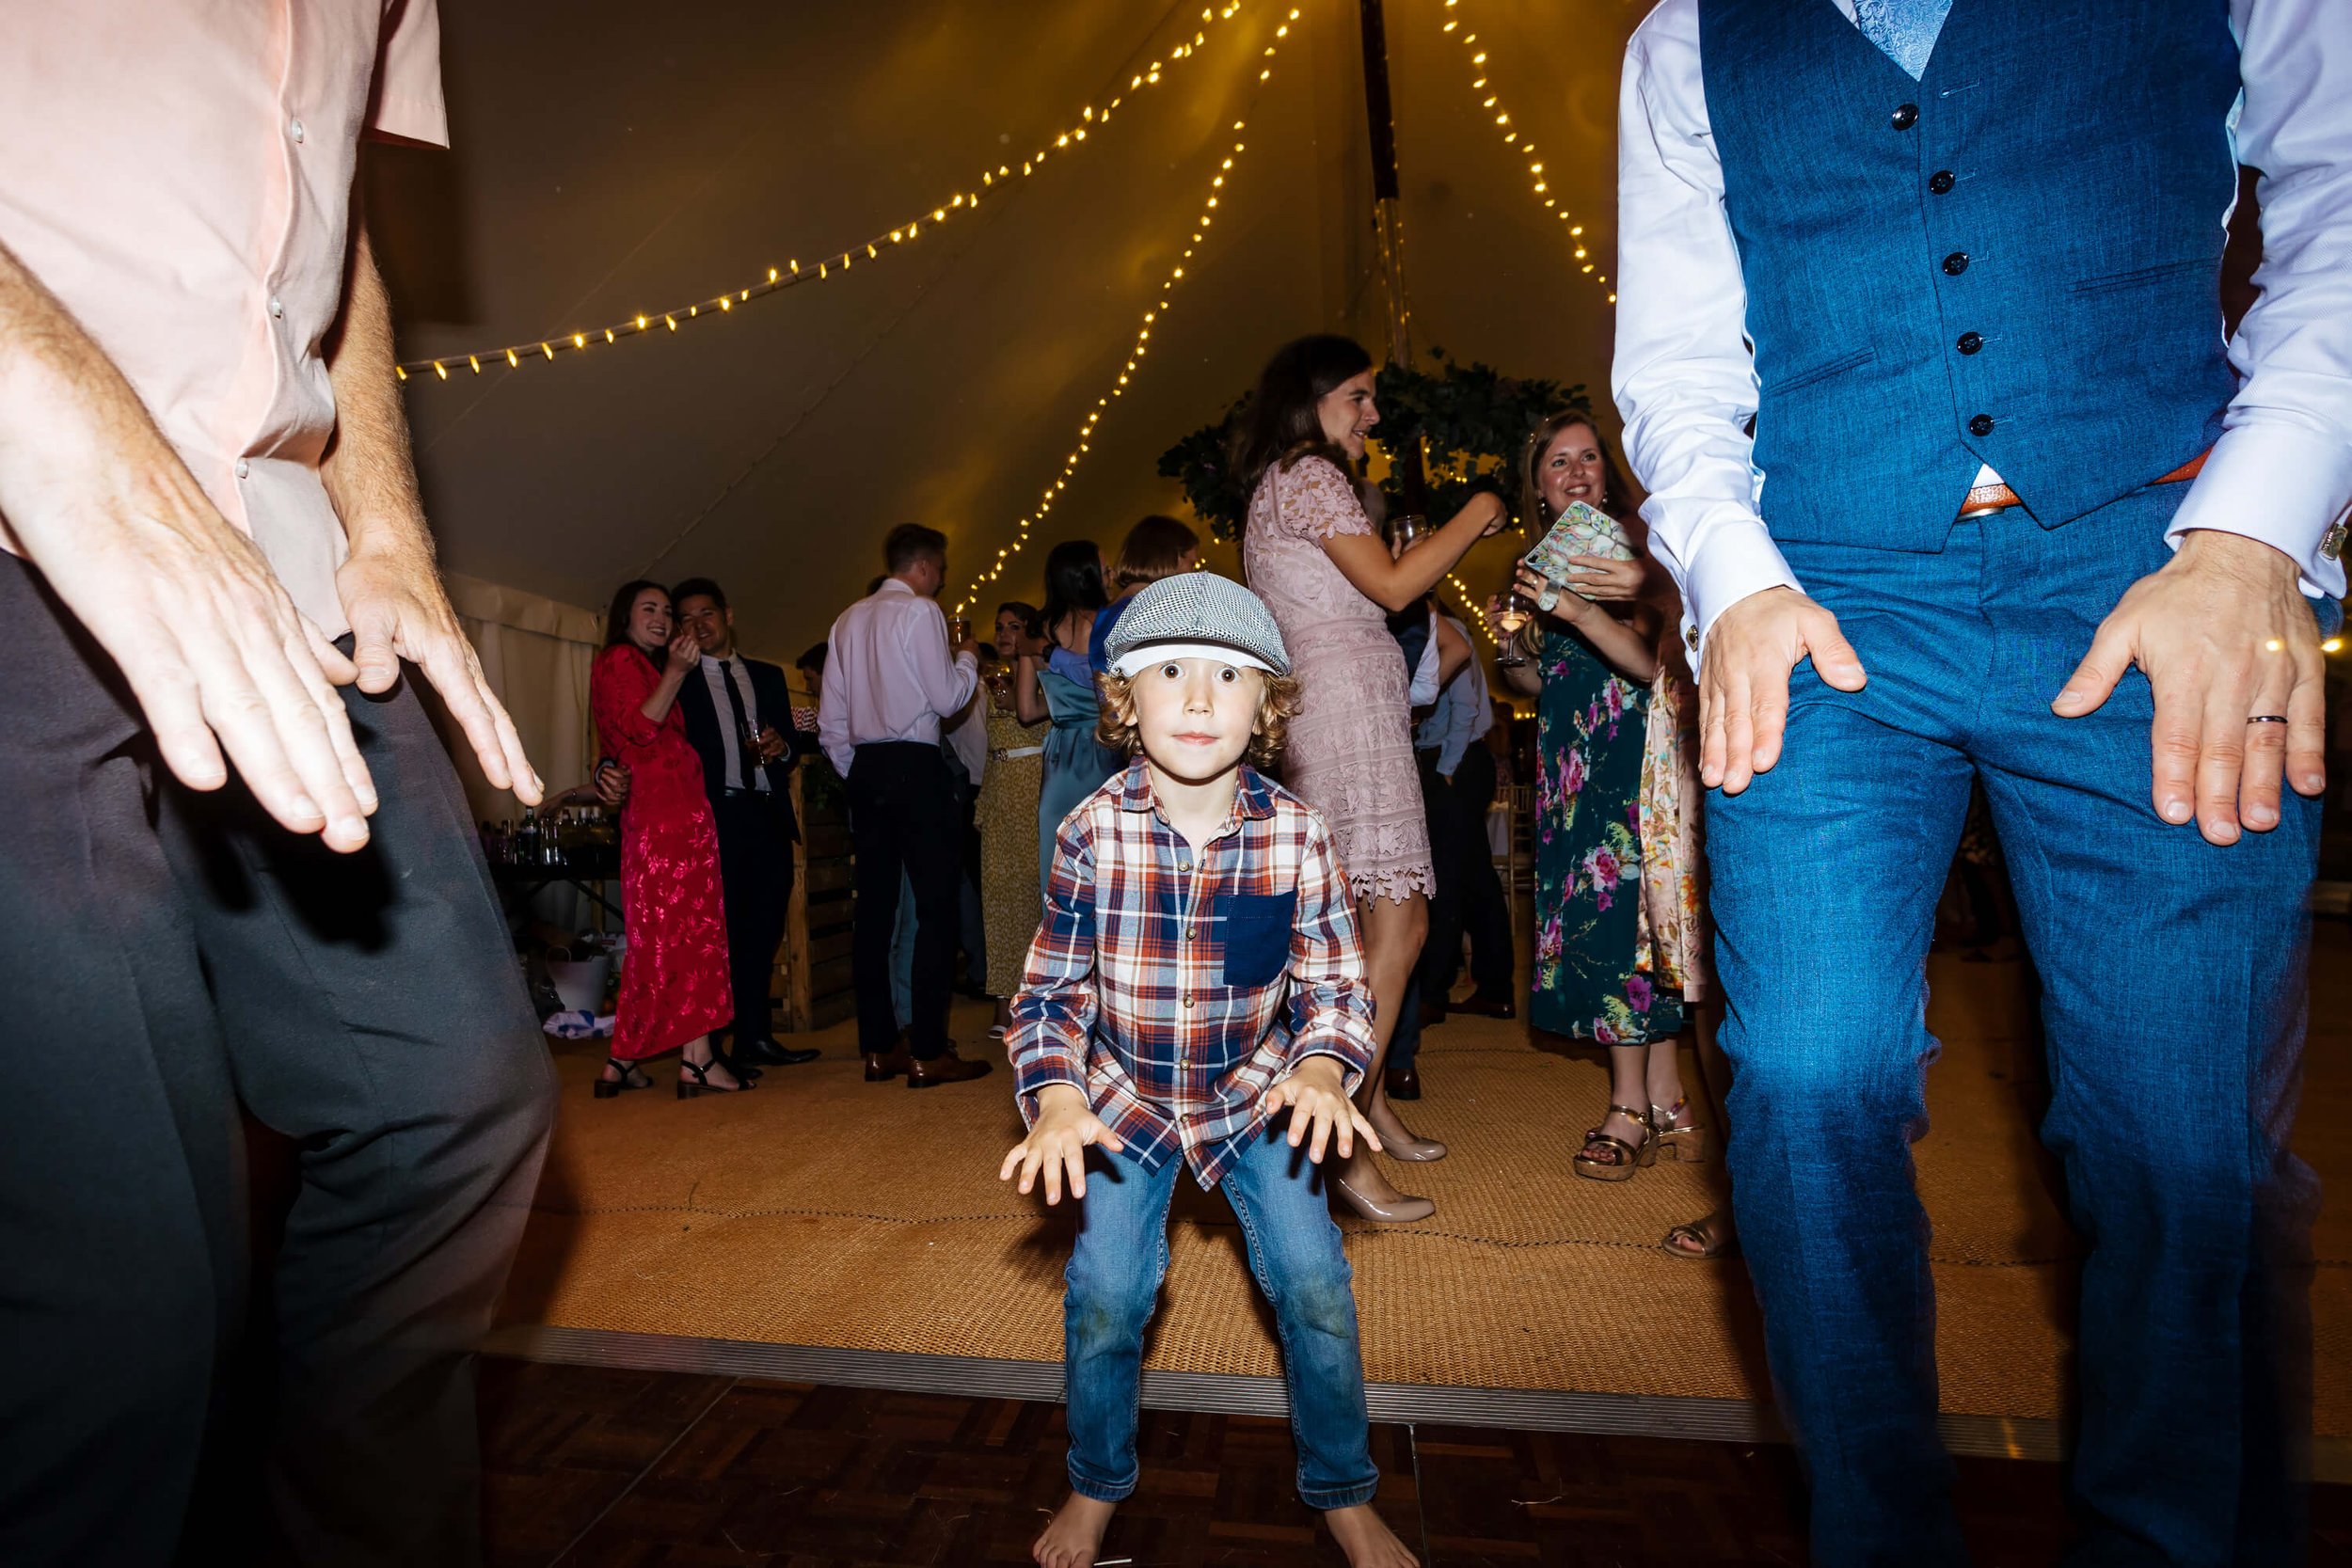 Young boy dancing at a wedding in Yorkshire